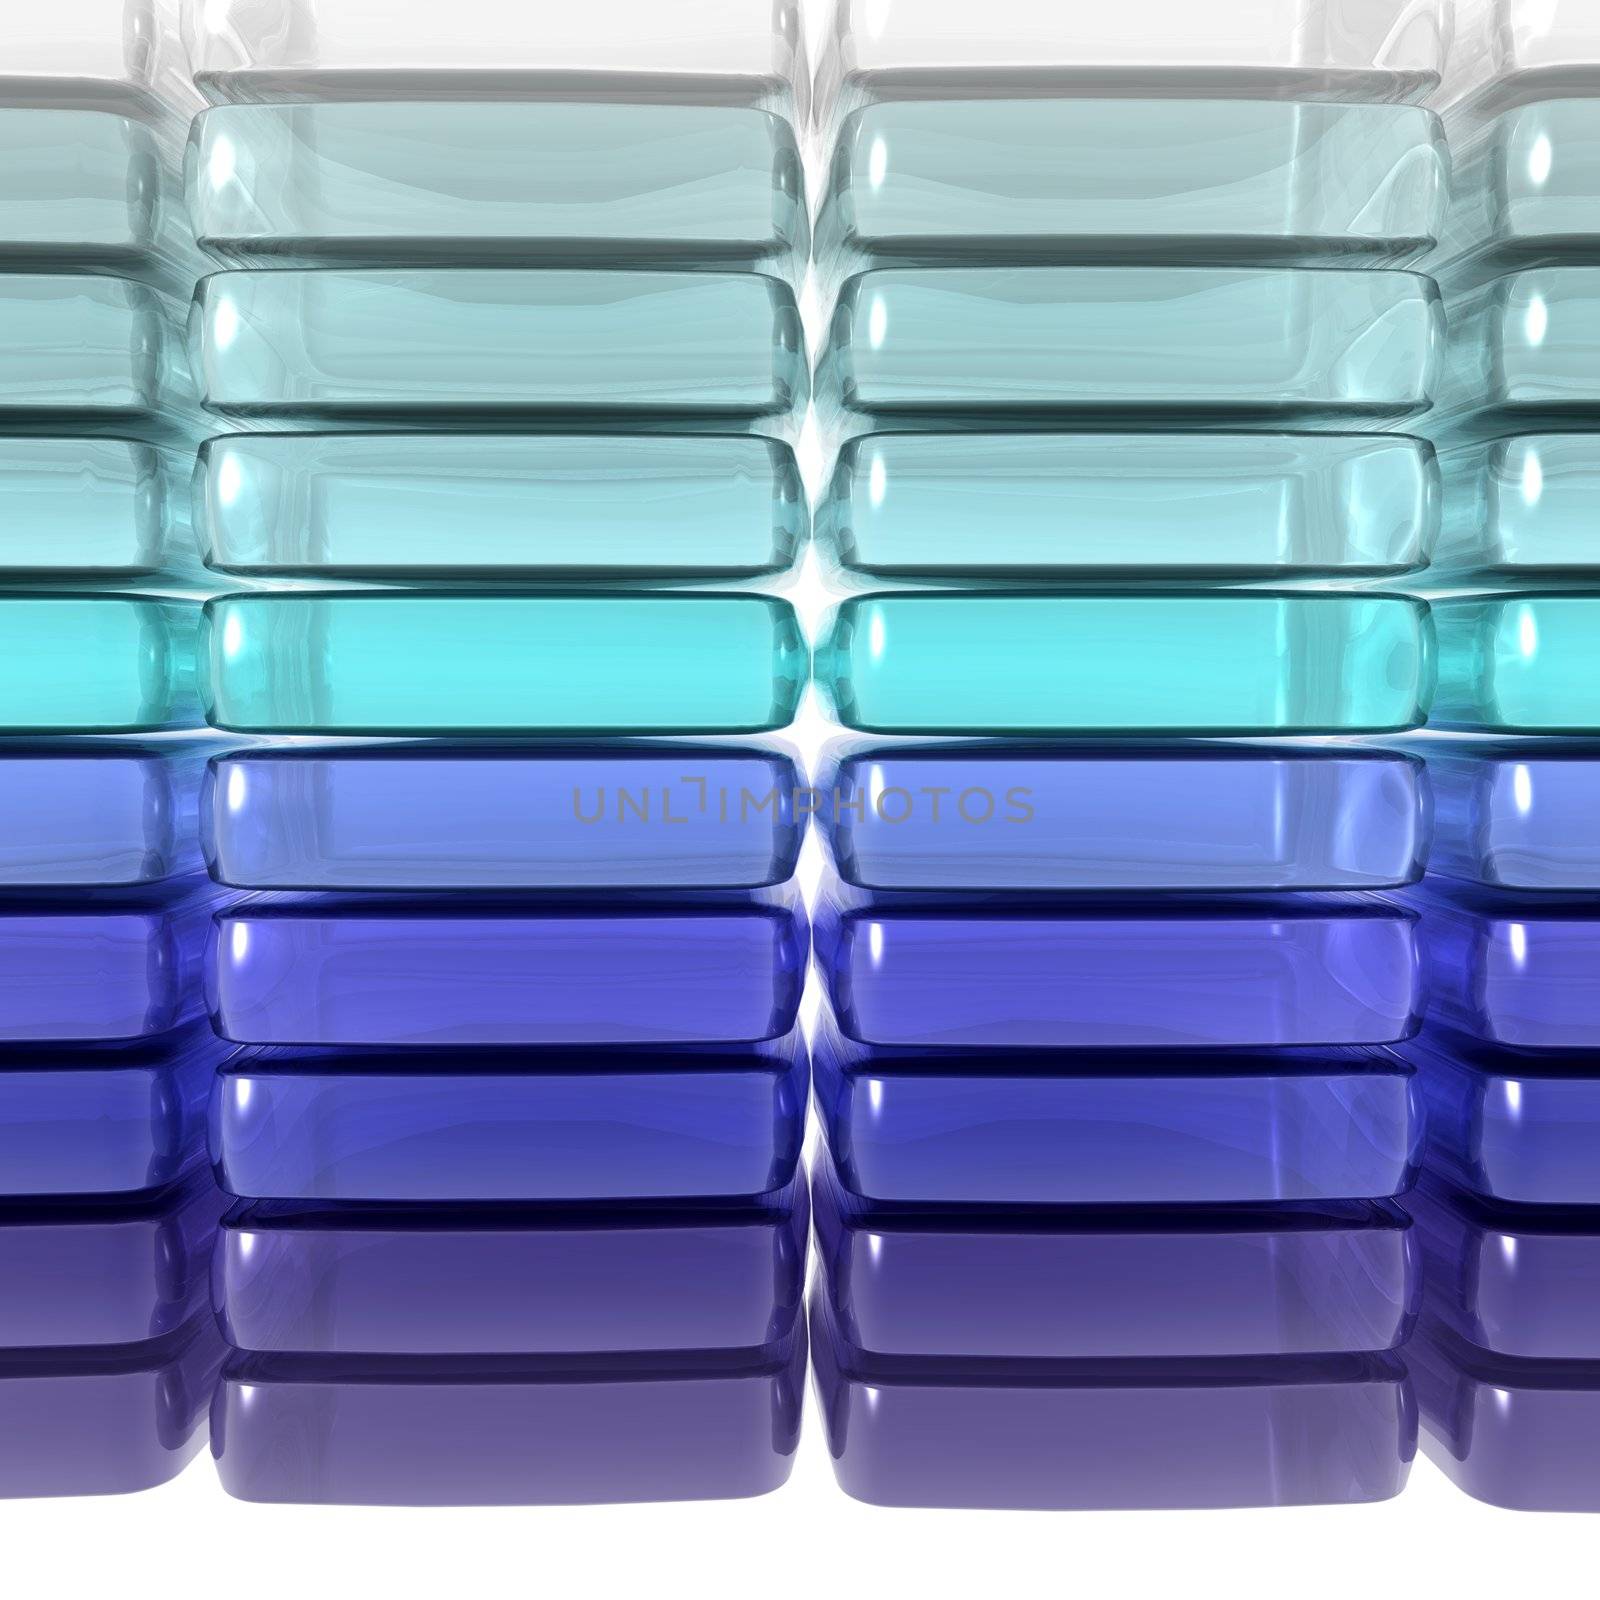 3D computer generate gel cubes of various colors representing unity and team.